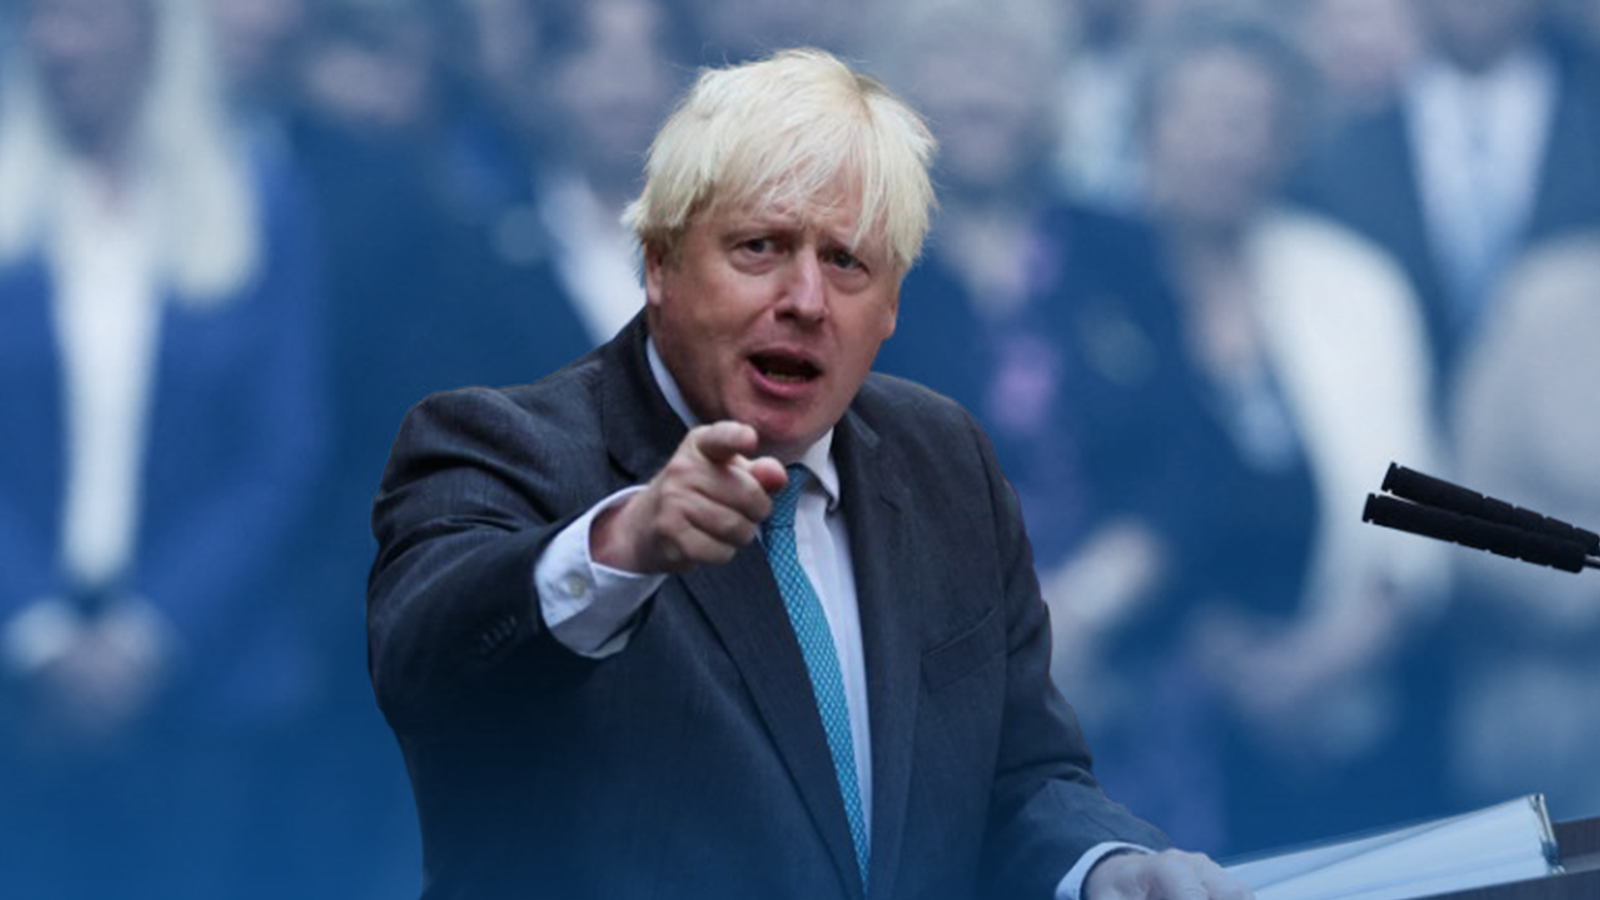 Boris Johnson becoming highest-earning MP this parliament with £2.4m for speaking events